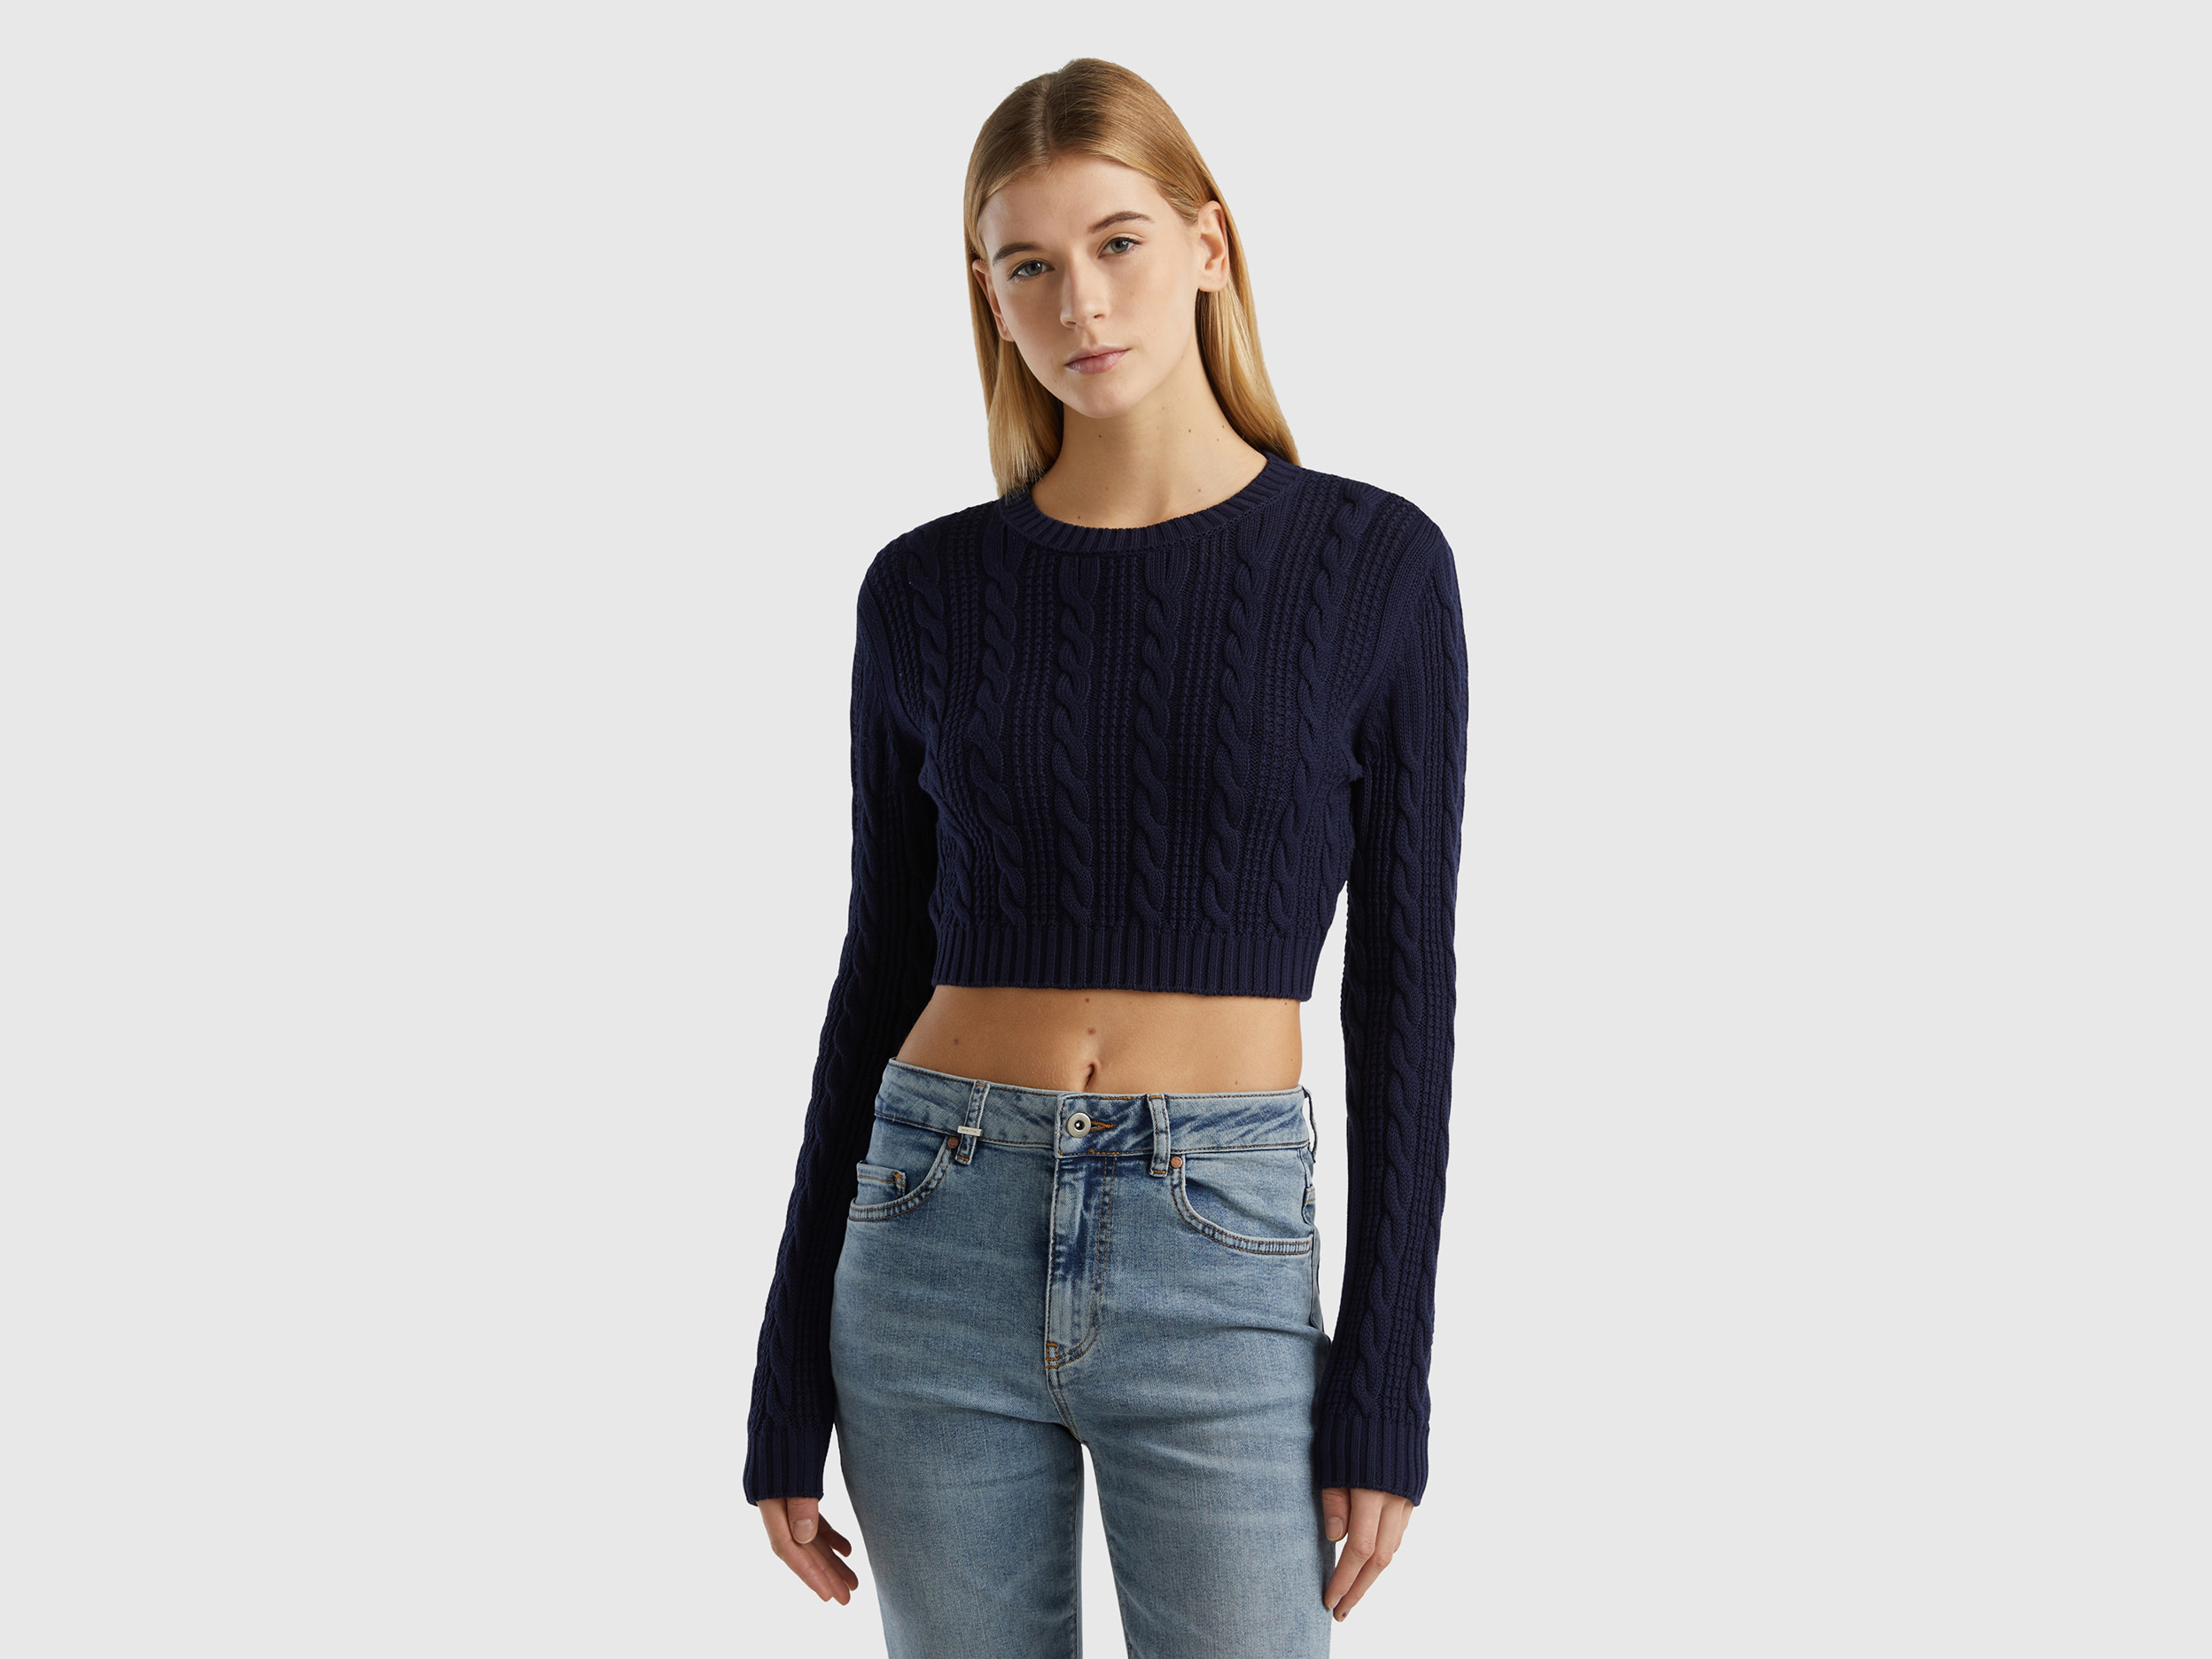 Benetton, Cropped Cable Knit Sweater, size L-XL, Dark Blue, Women